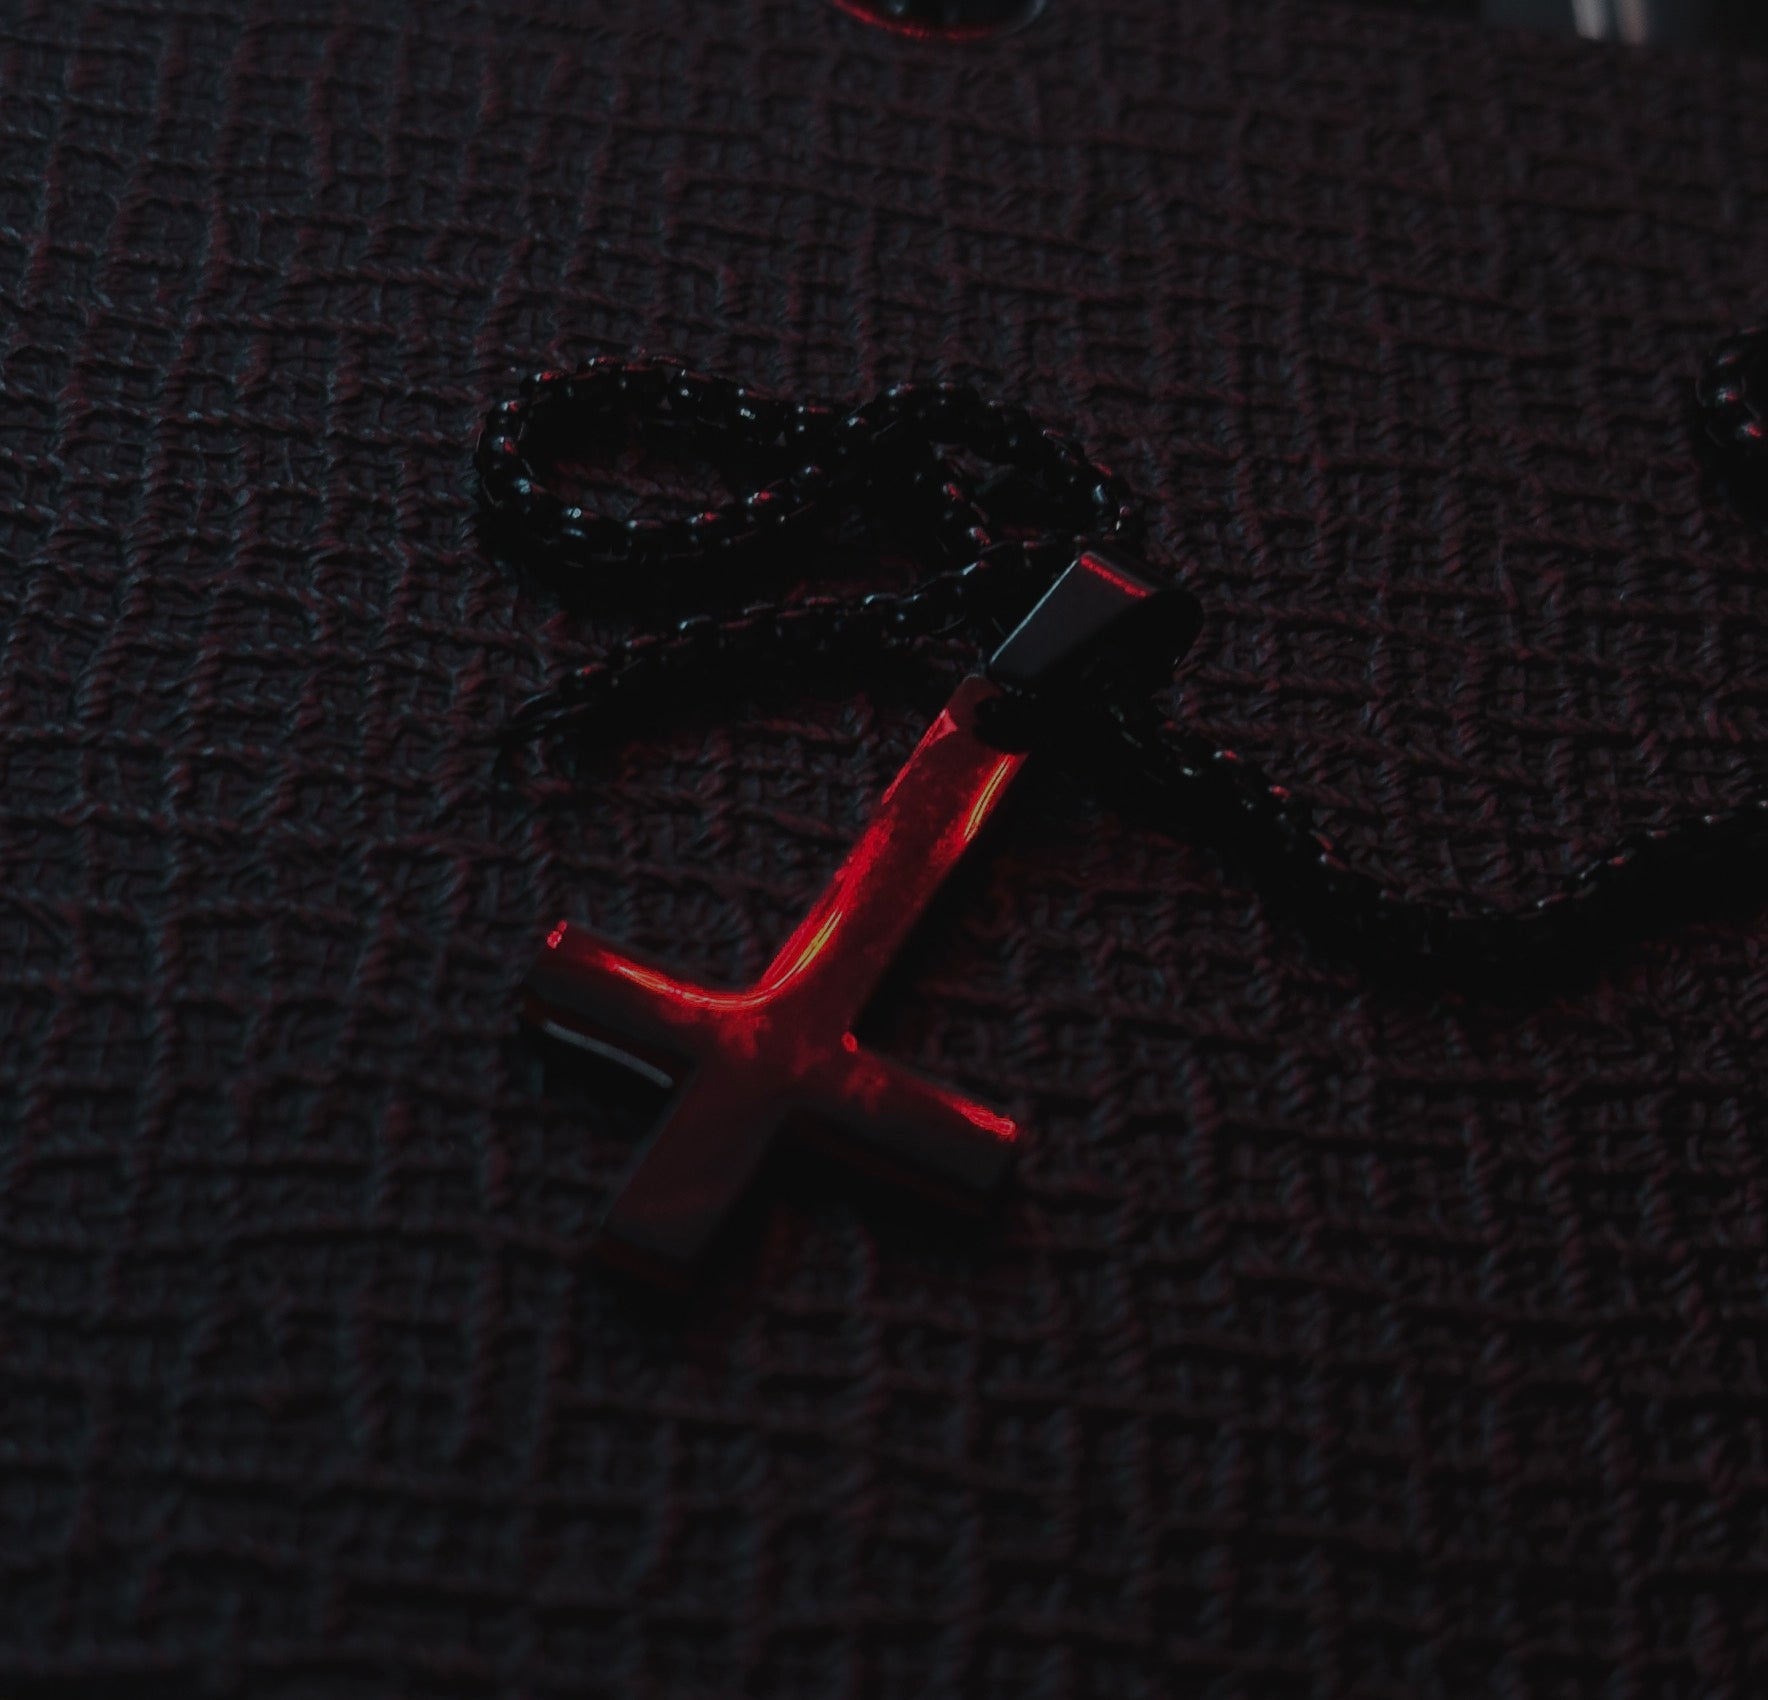 SKYR Satanic Inverted Cross Necklace - Black with Red Bevel